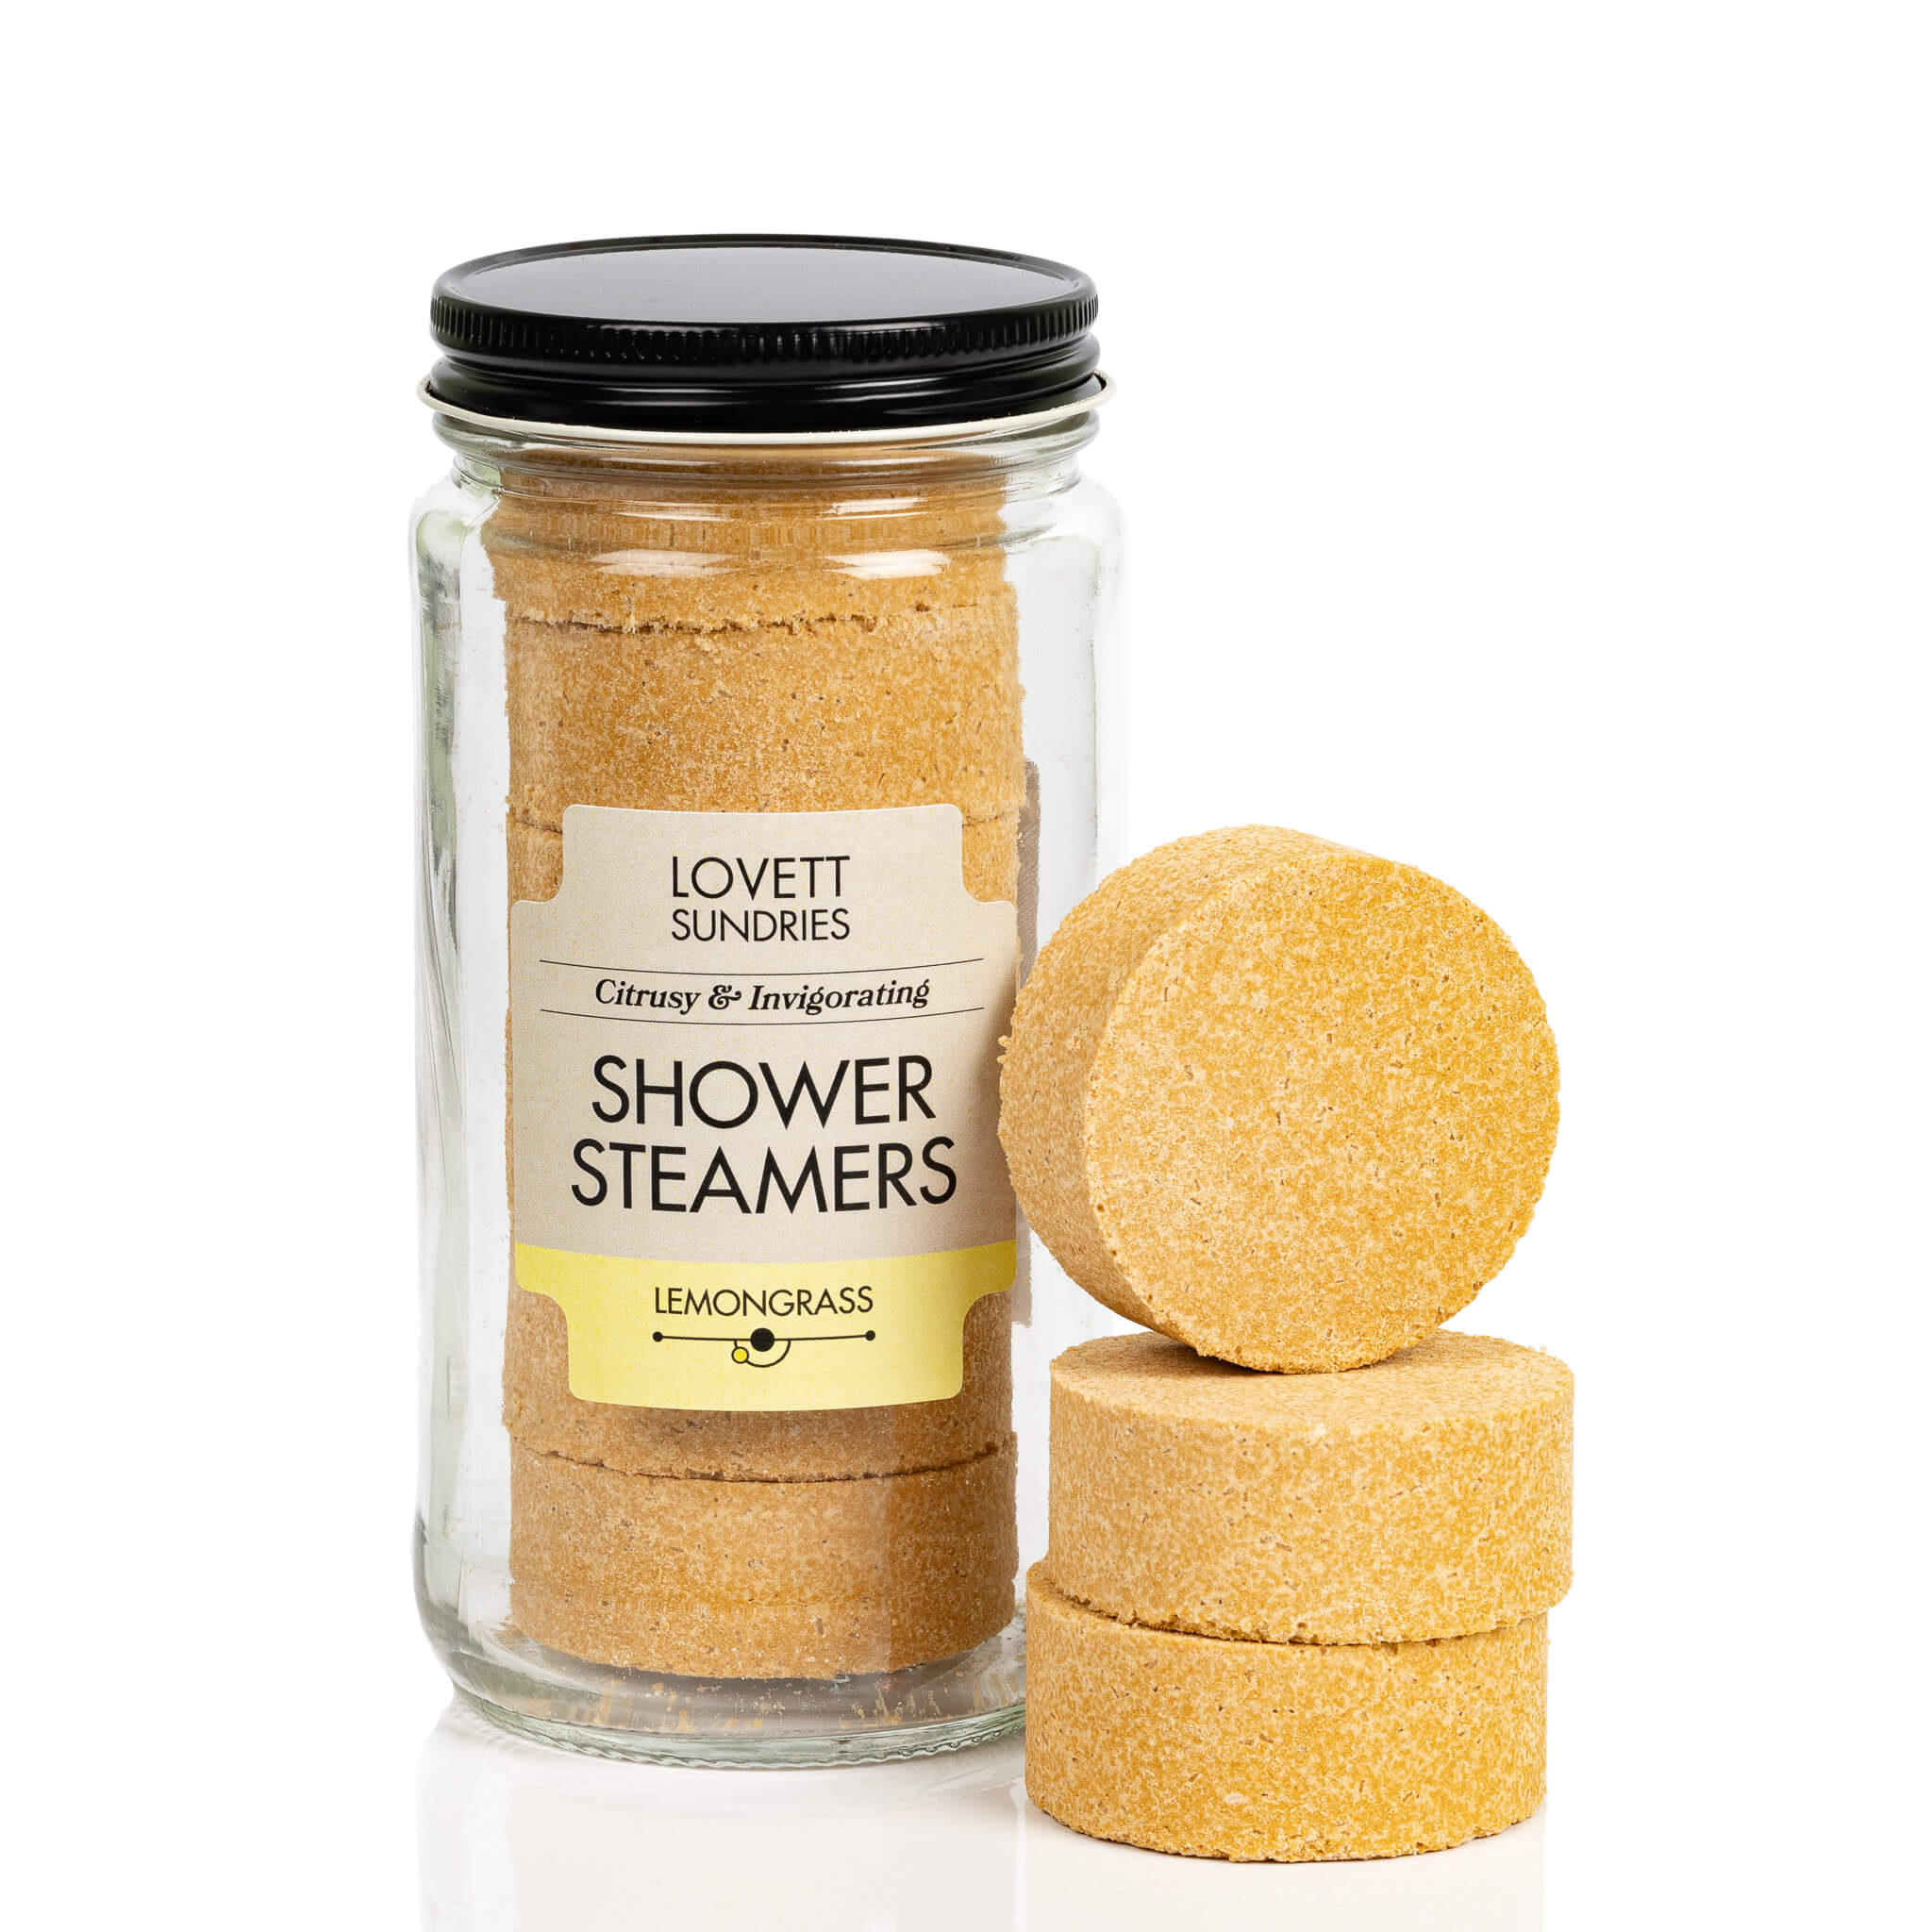 Recyclable glass jar filled with 6 lemongrass scented all natural shower steamers.